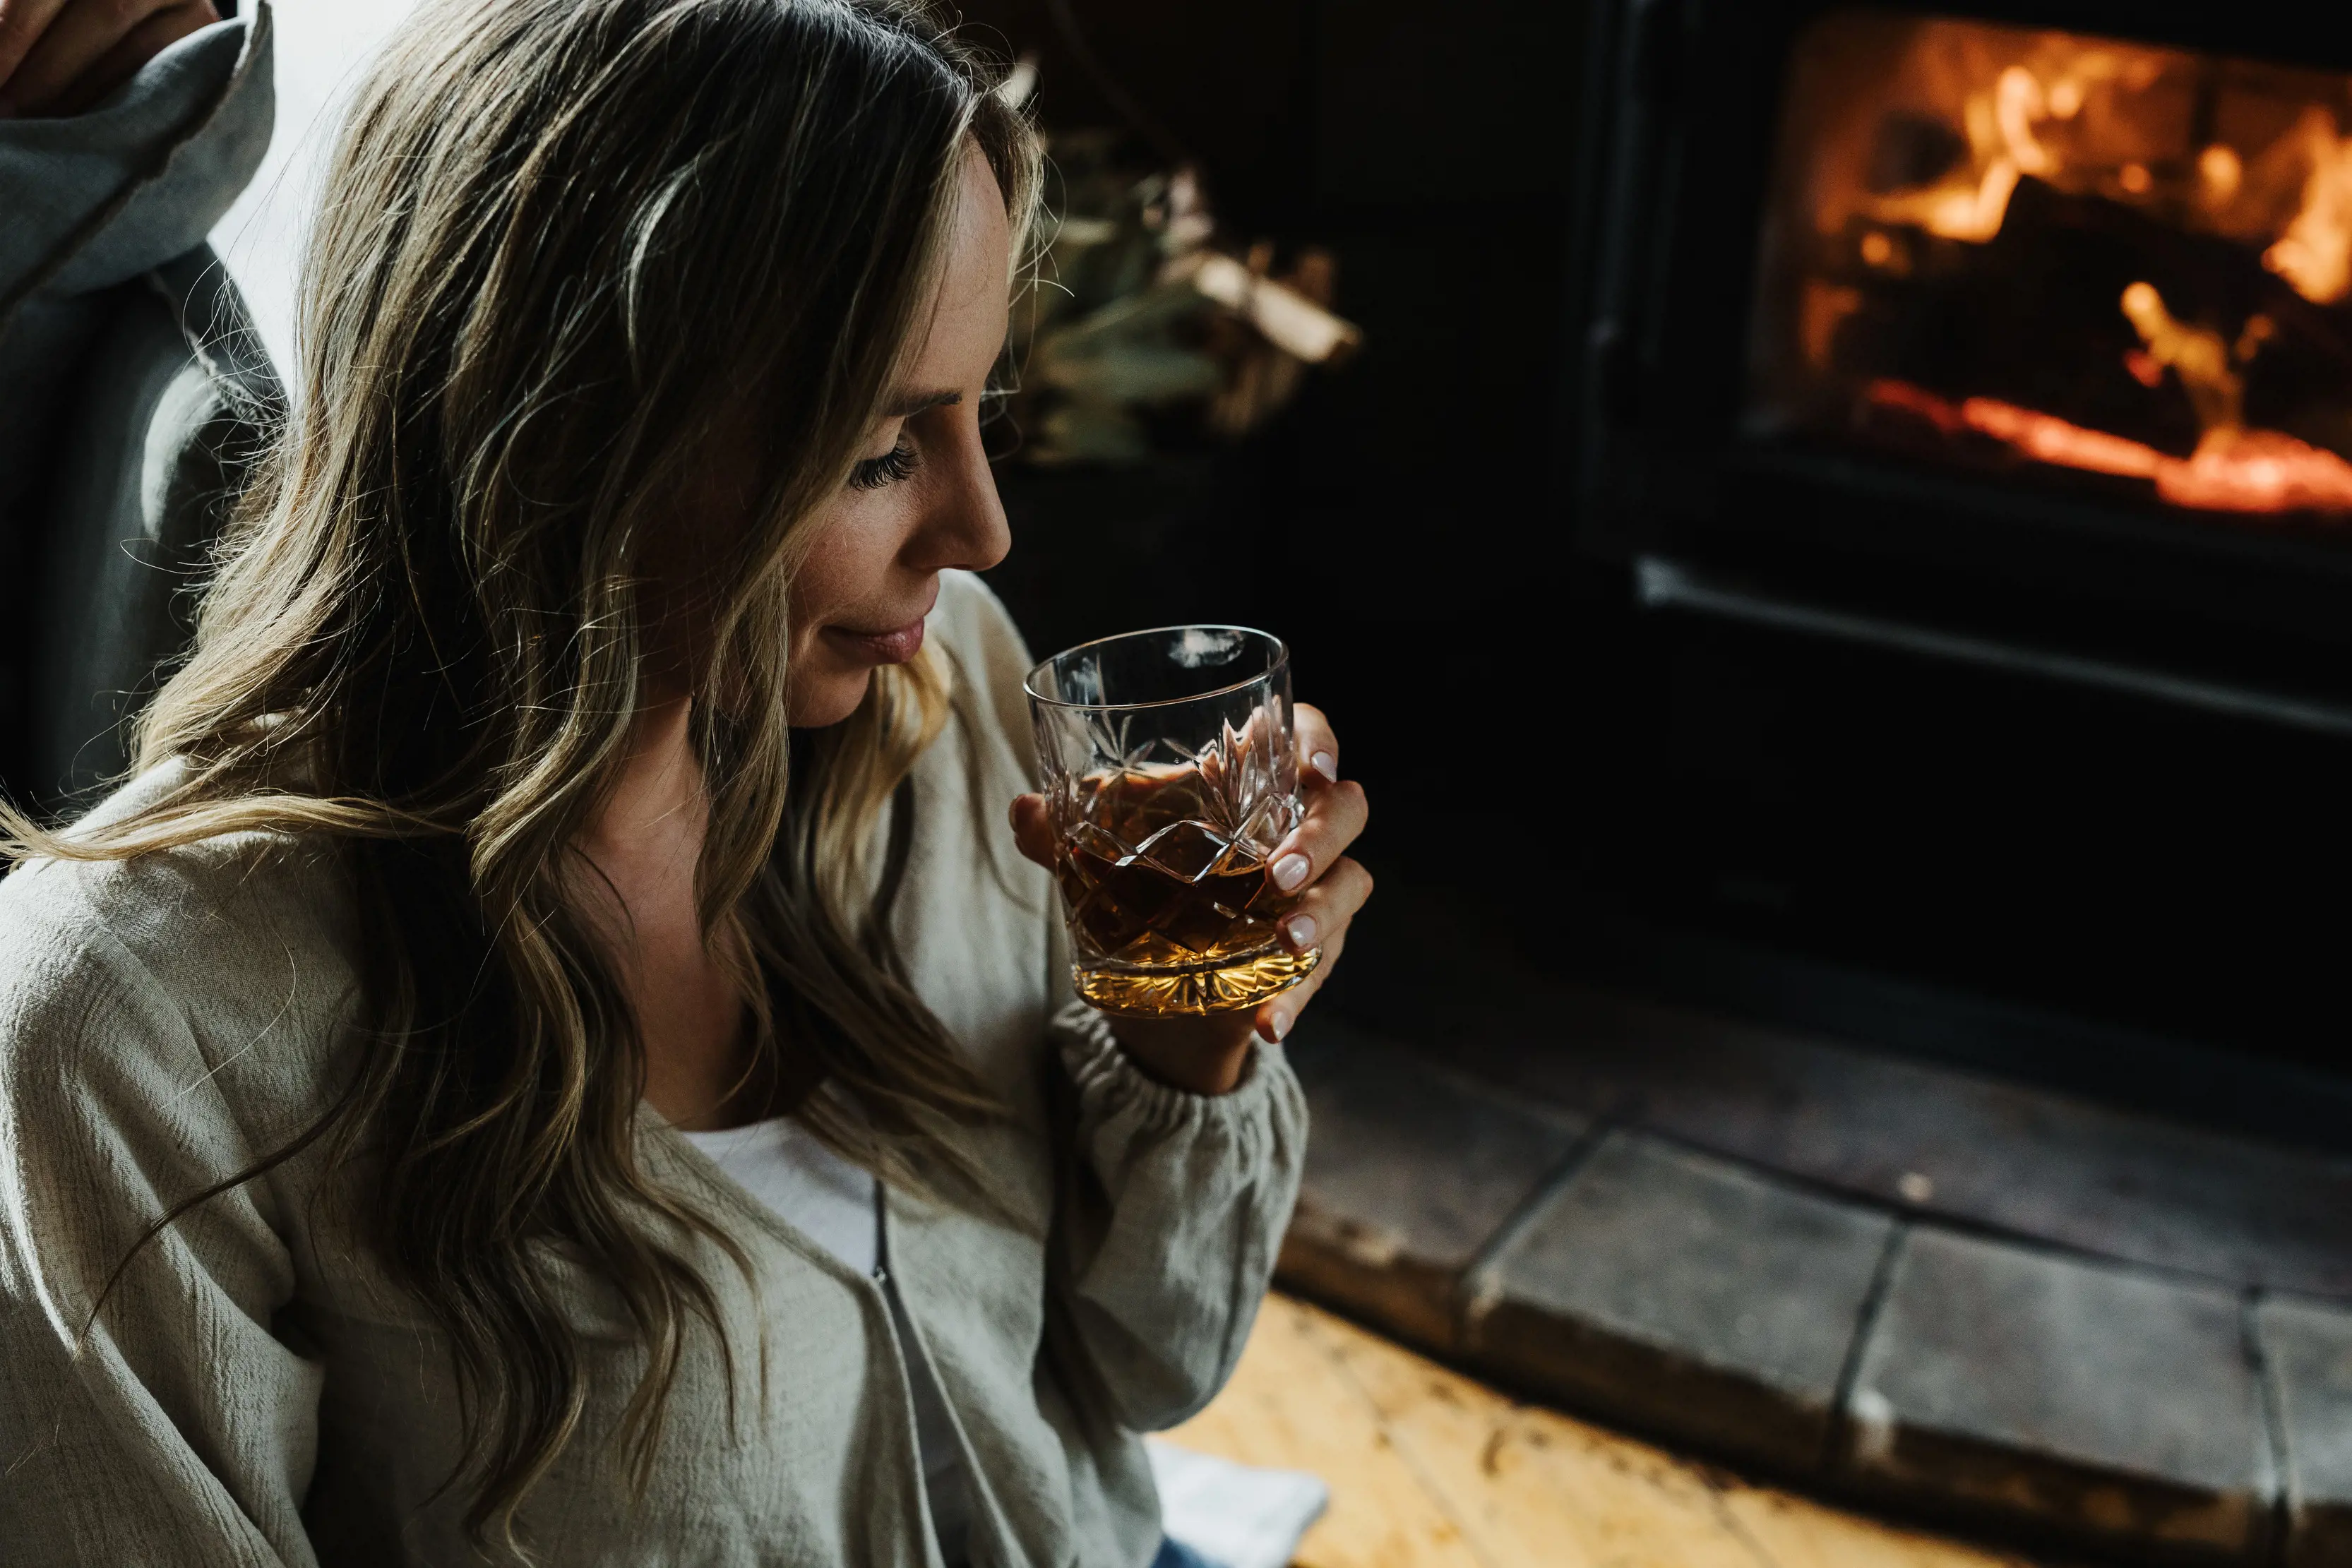 Close up of a female holding a glass of whisky indoors by the fire on Satellite Island, a small, privately-owned island.